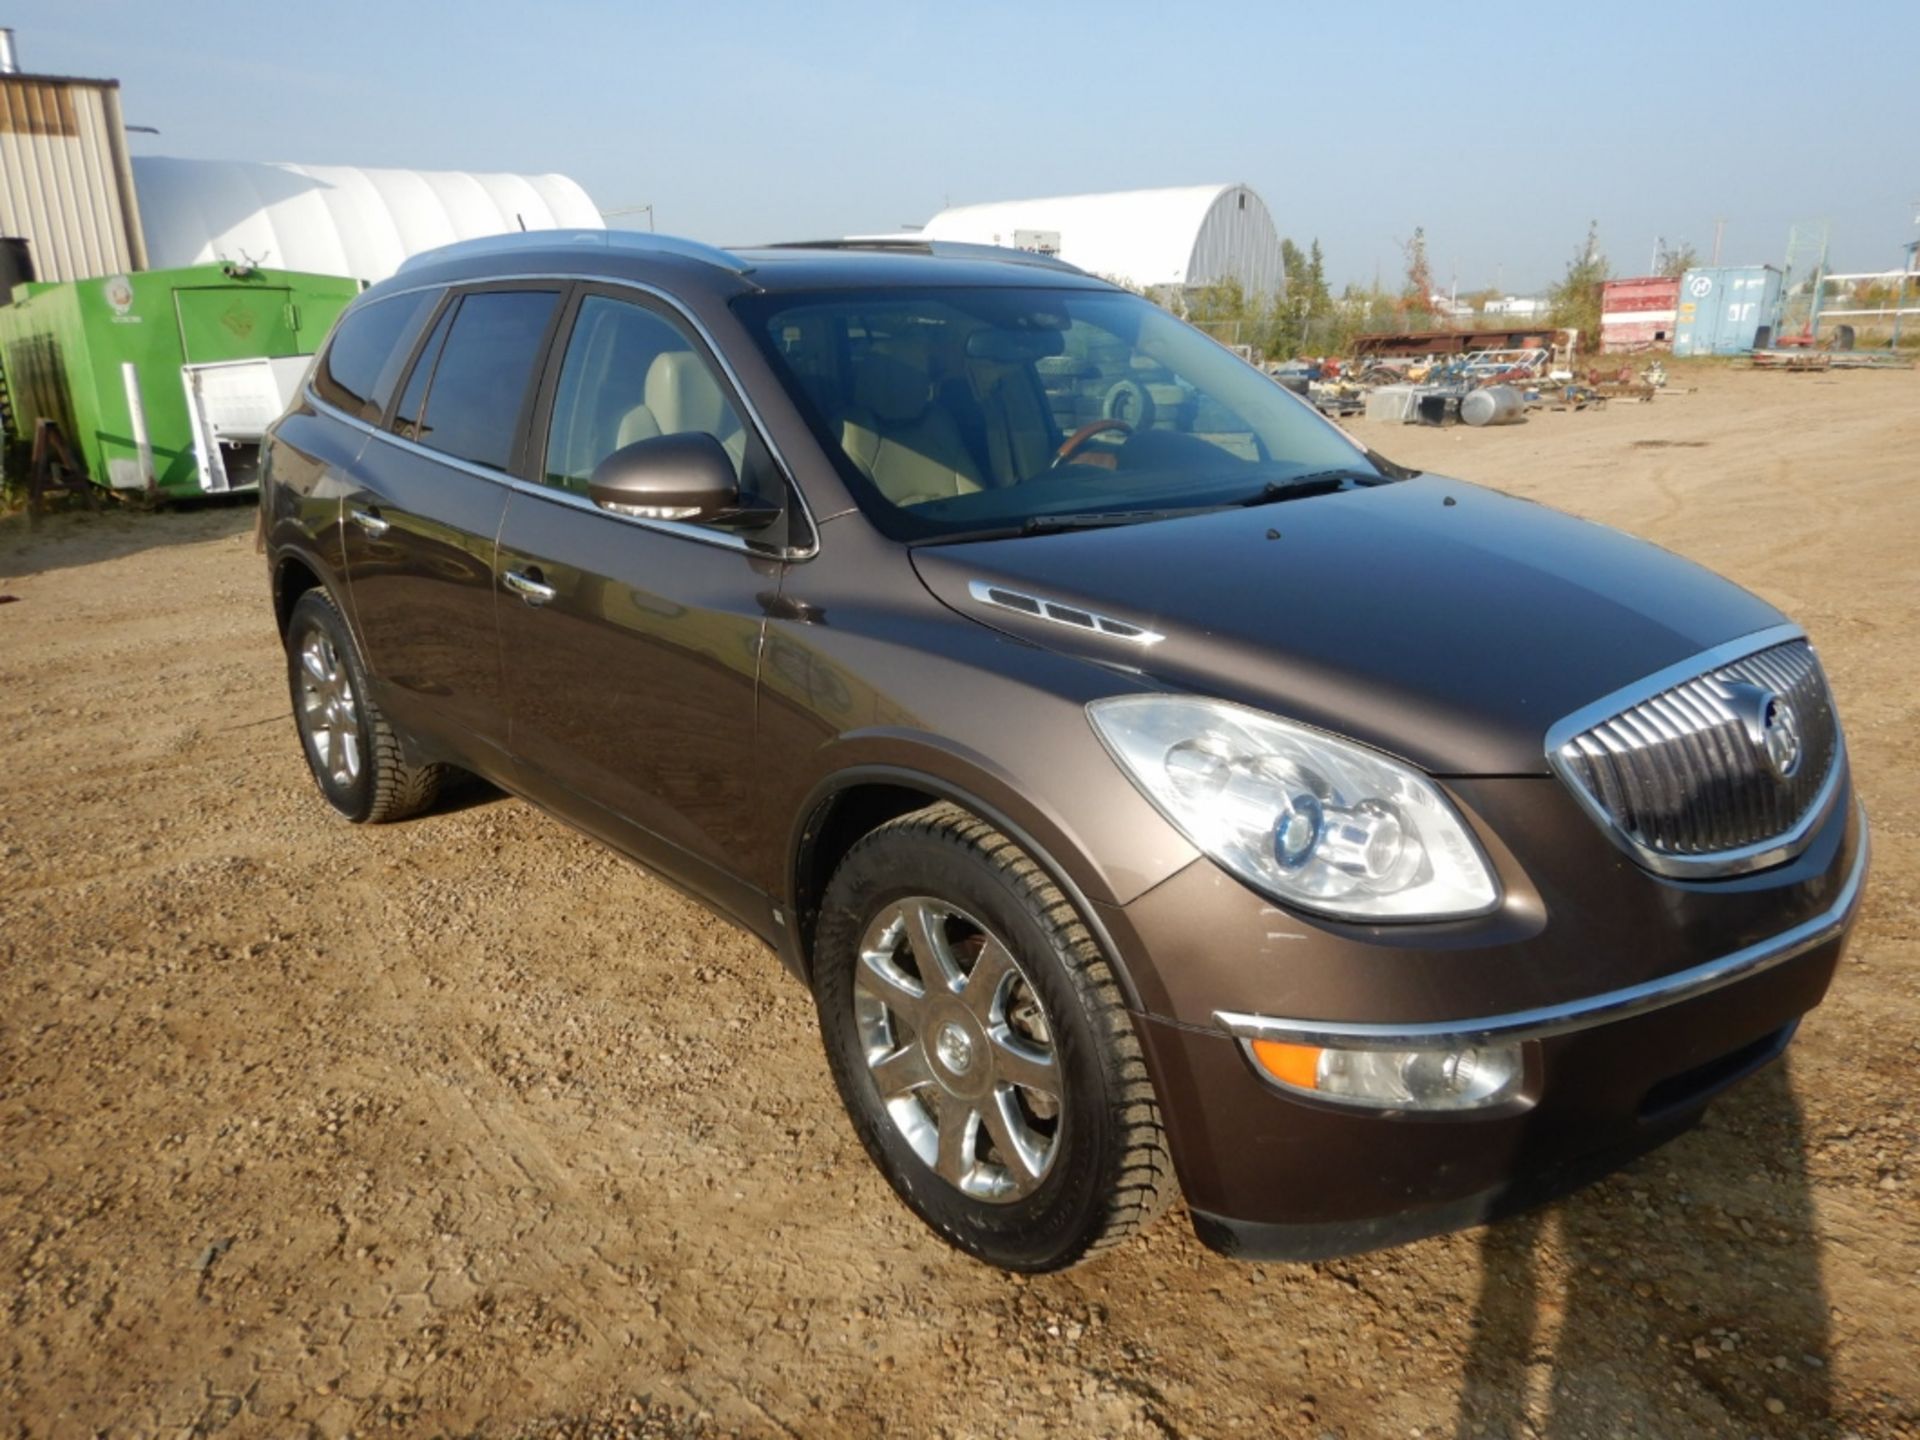 2010 BUICK ENCLAVE CXL SUV 7 PASSENGER, FULL LOAD, 165,300 KM SHOWING, S/N 5GALVCED7AJ123531 - Image 5 of 11